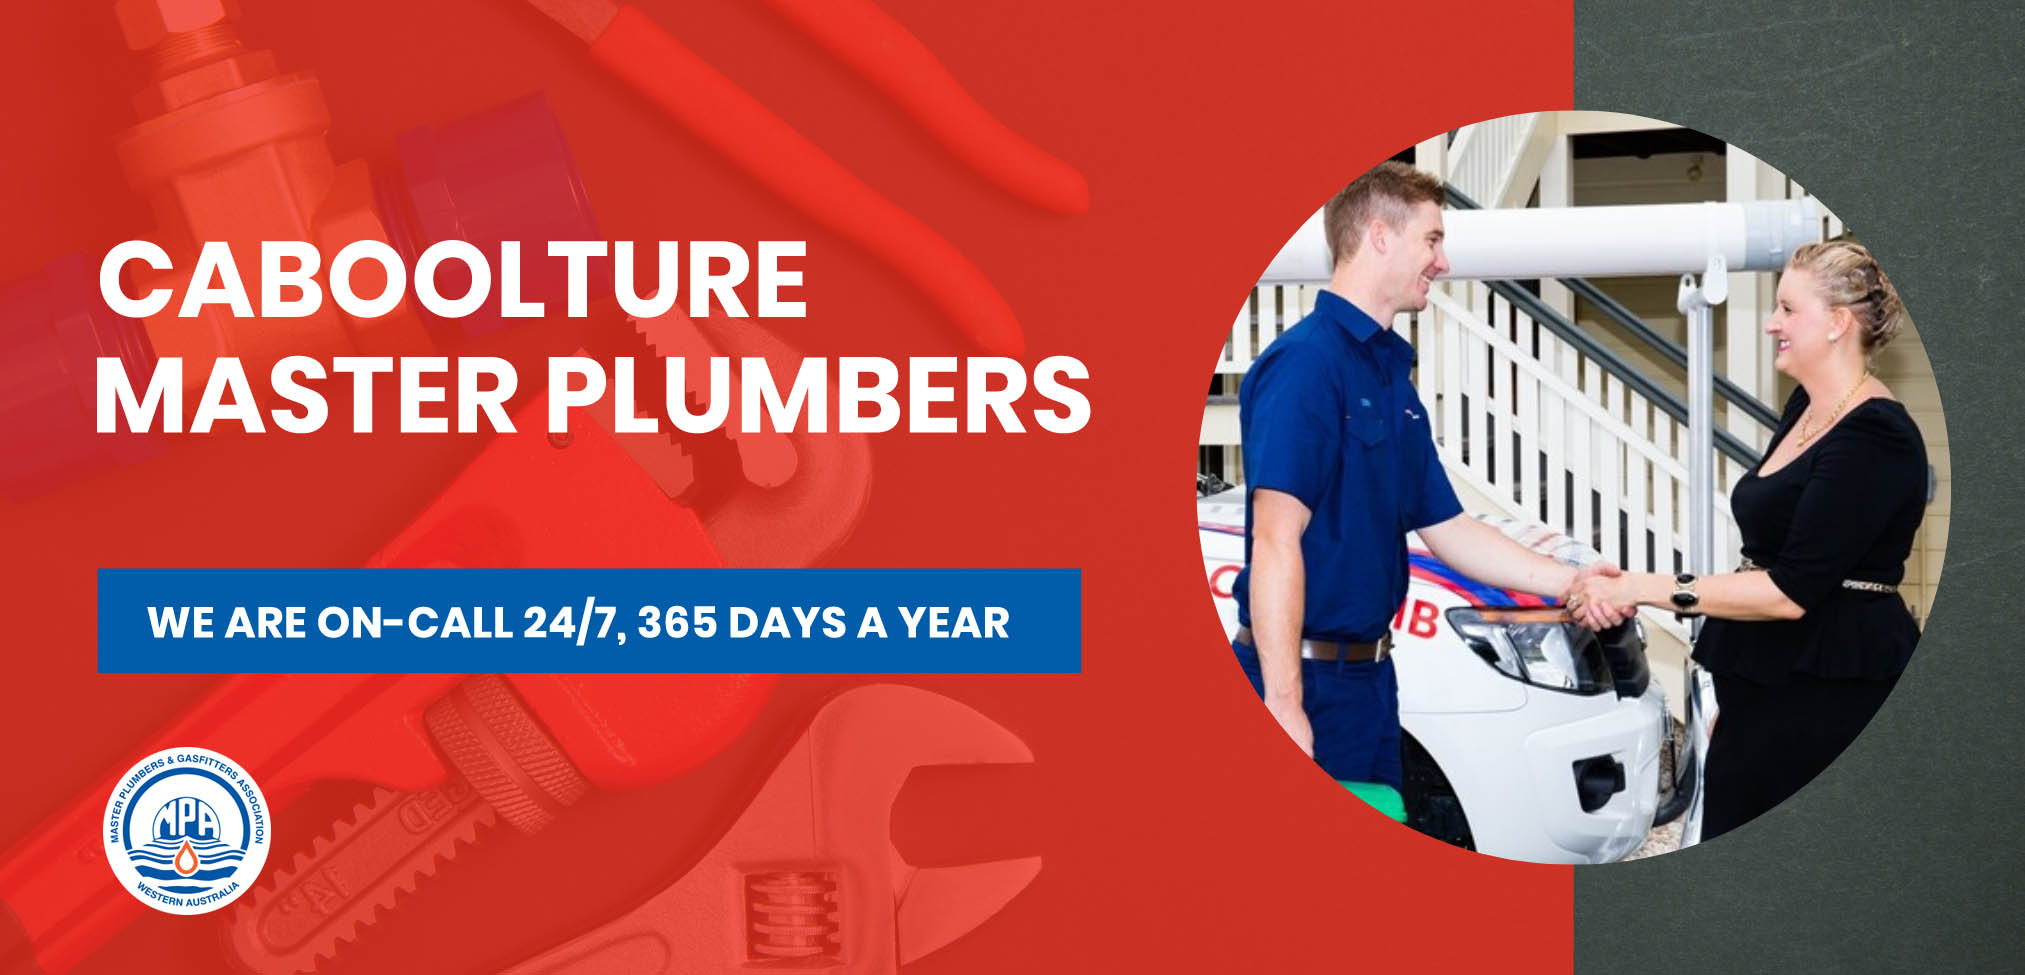 Plumber Caboolture